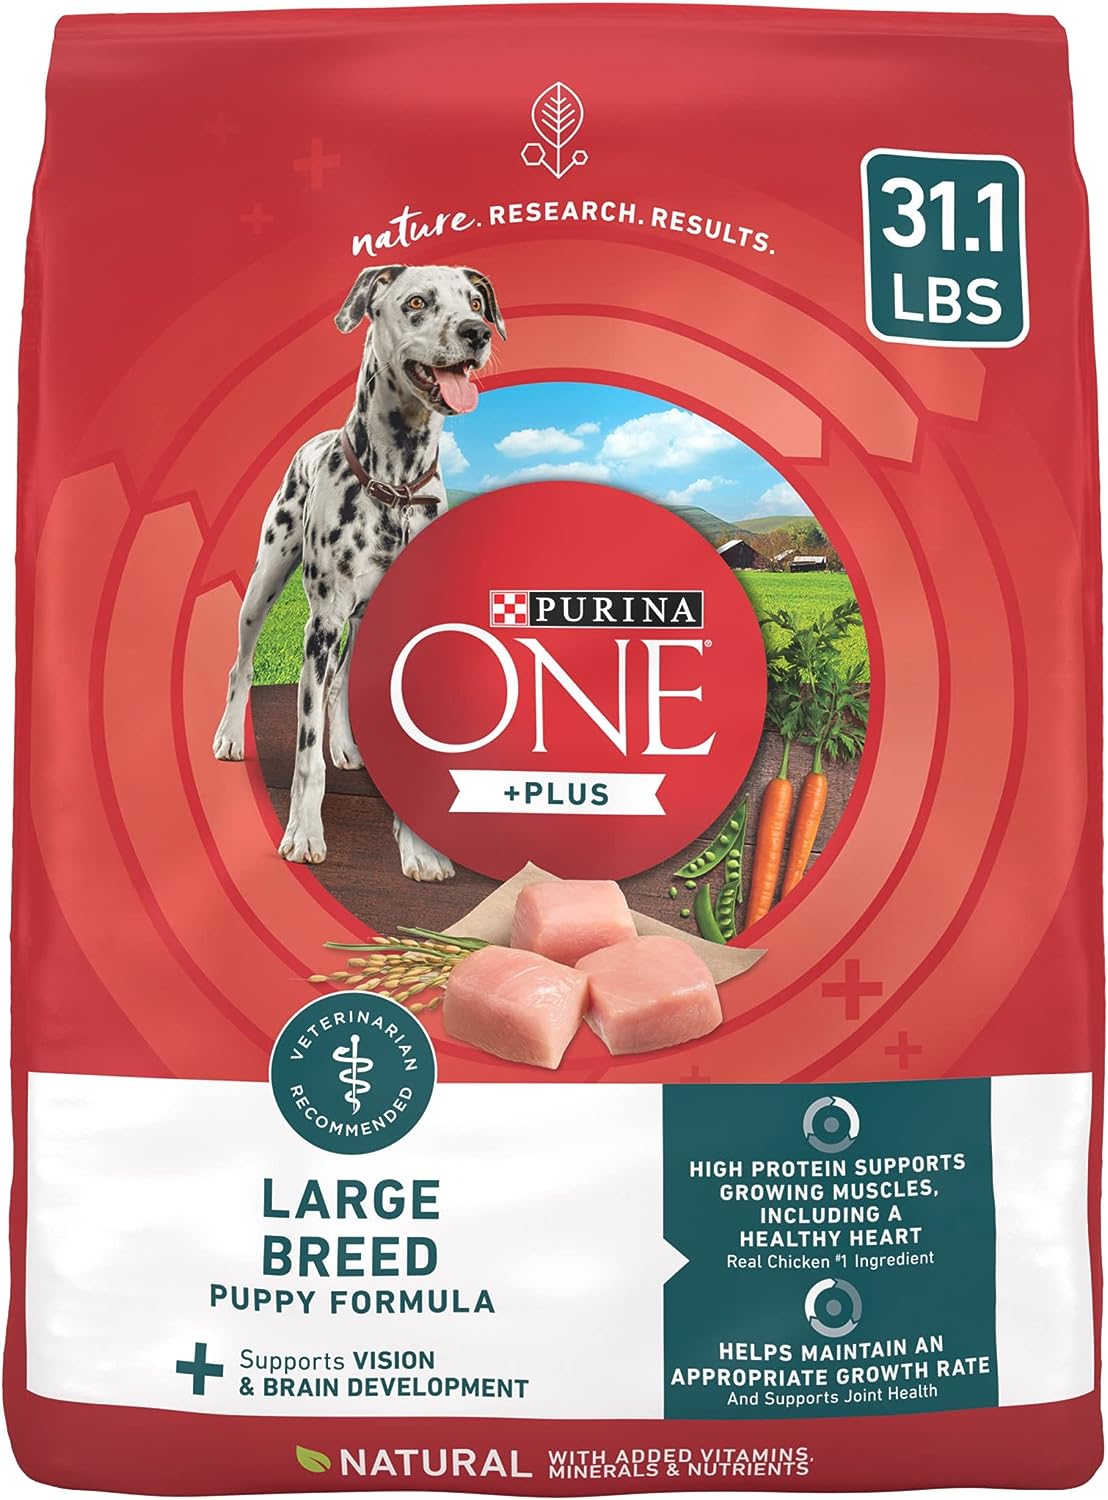 Purina ONE Plus Large Breed Puppy Food Dry Formula - 31.1 lb. Bag